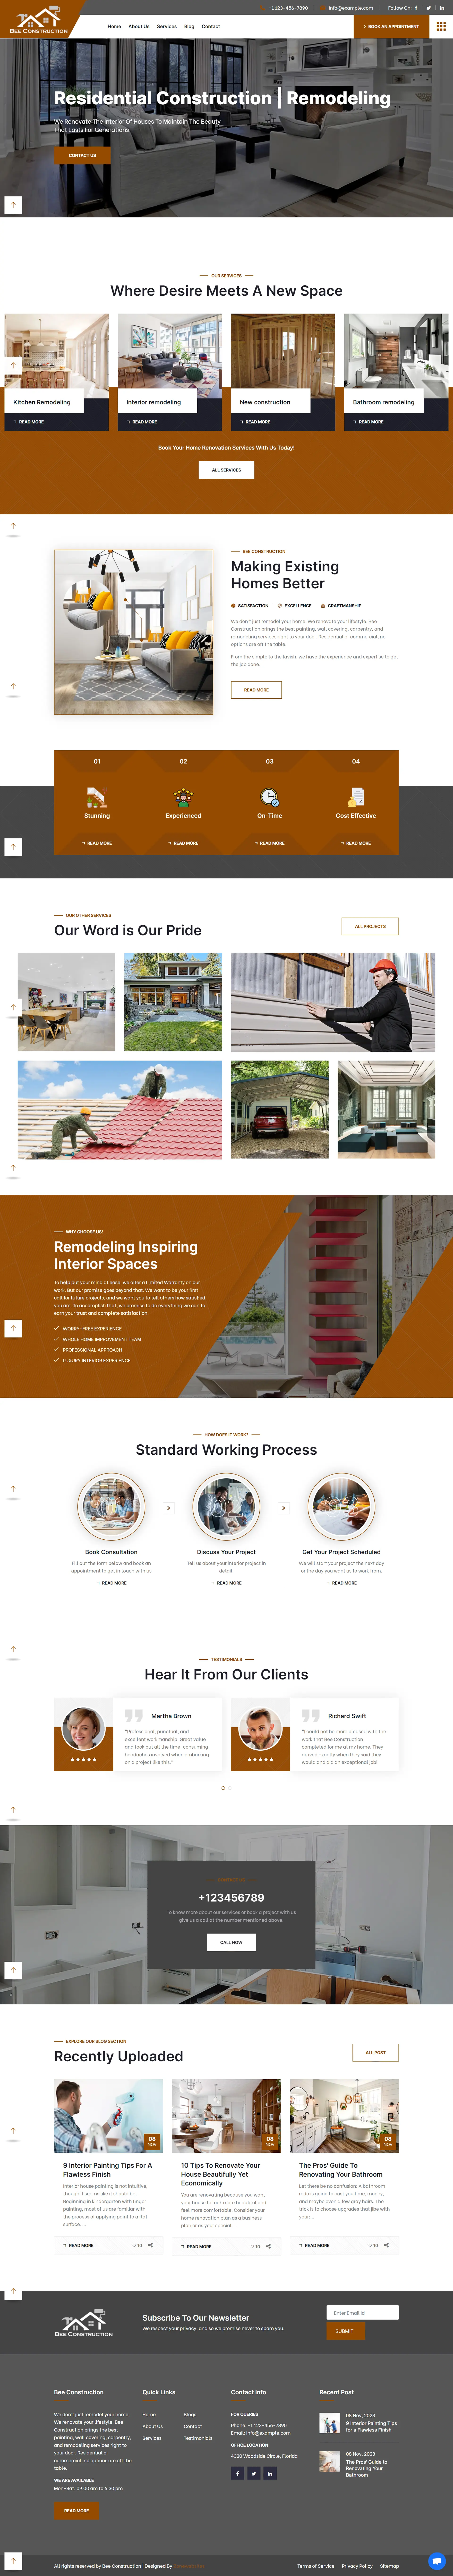 Home Renovation Services Website Template